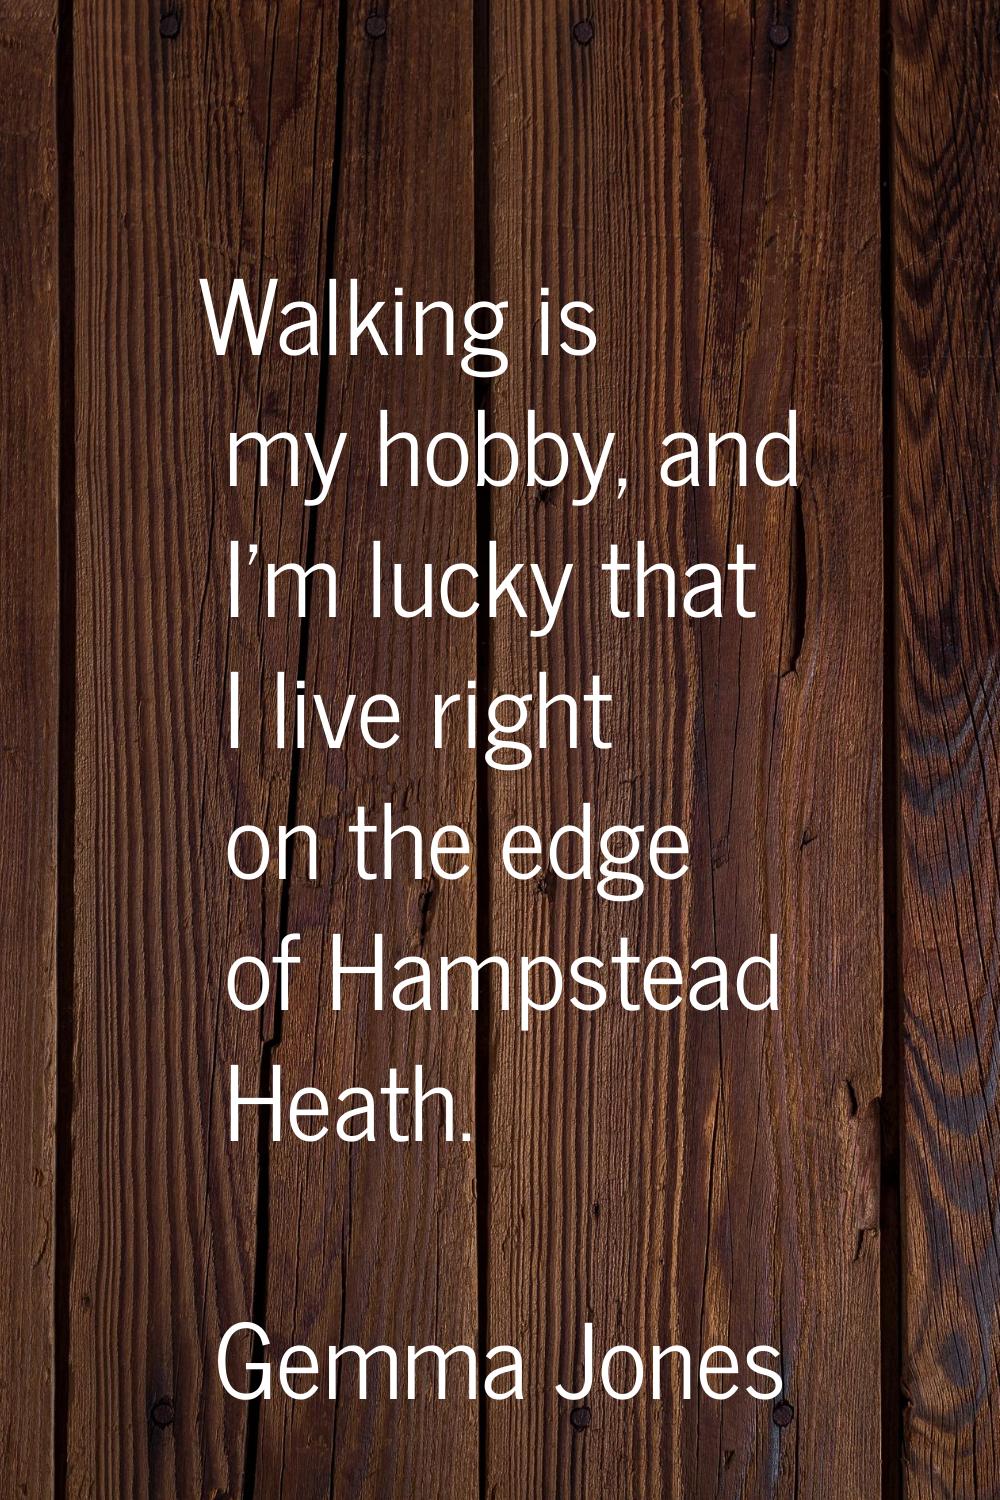 Walking is my hobby, and I'm lucky that I live right on the edge of Hampstead Heath.